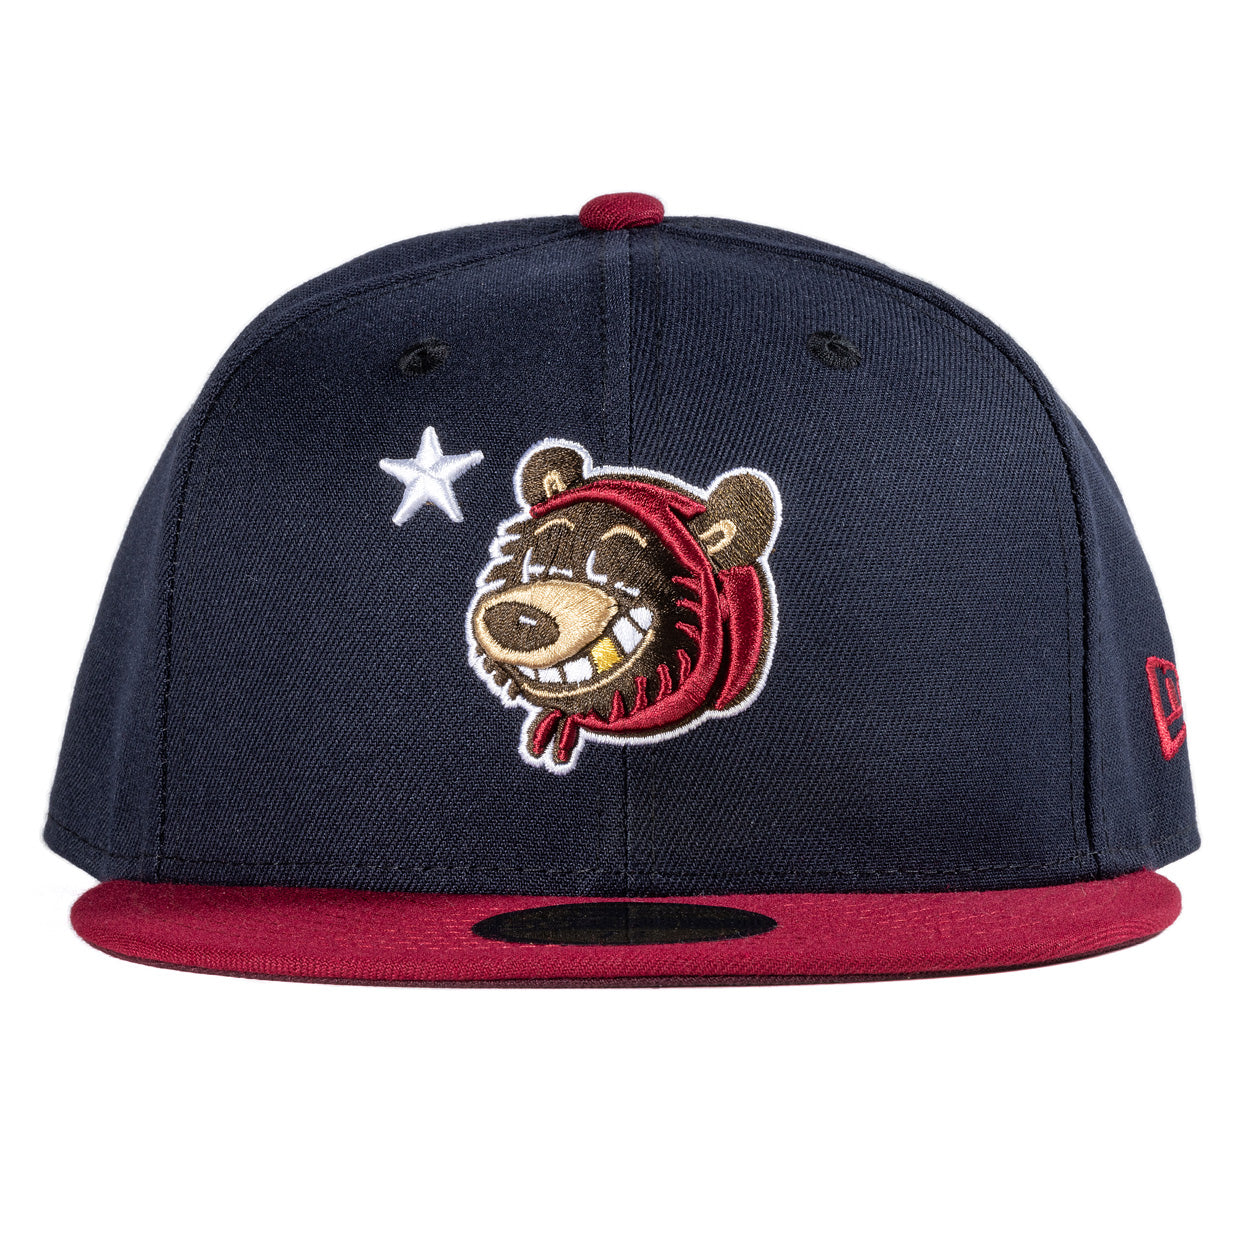 Old Glory New Era Fitted